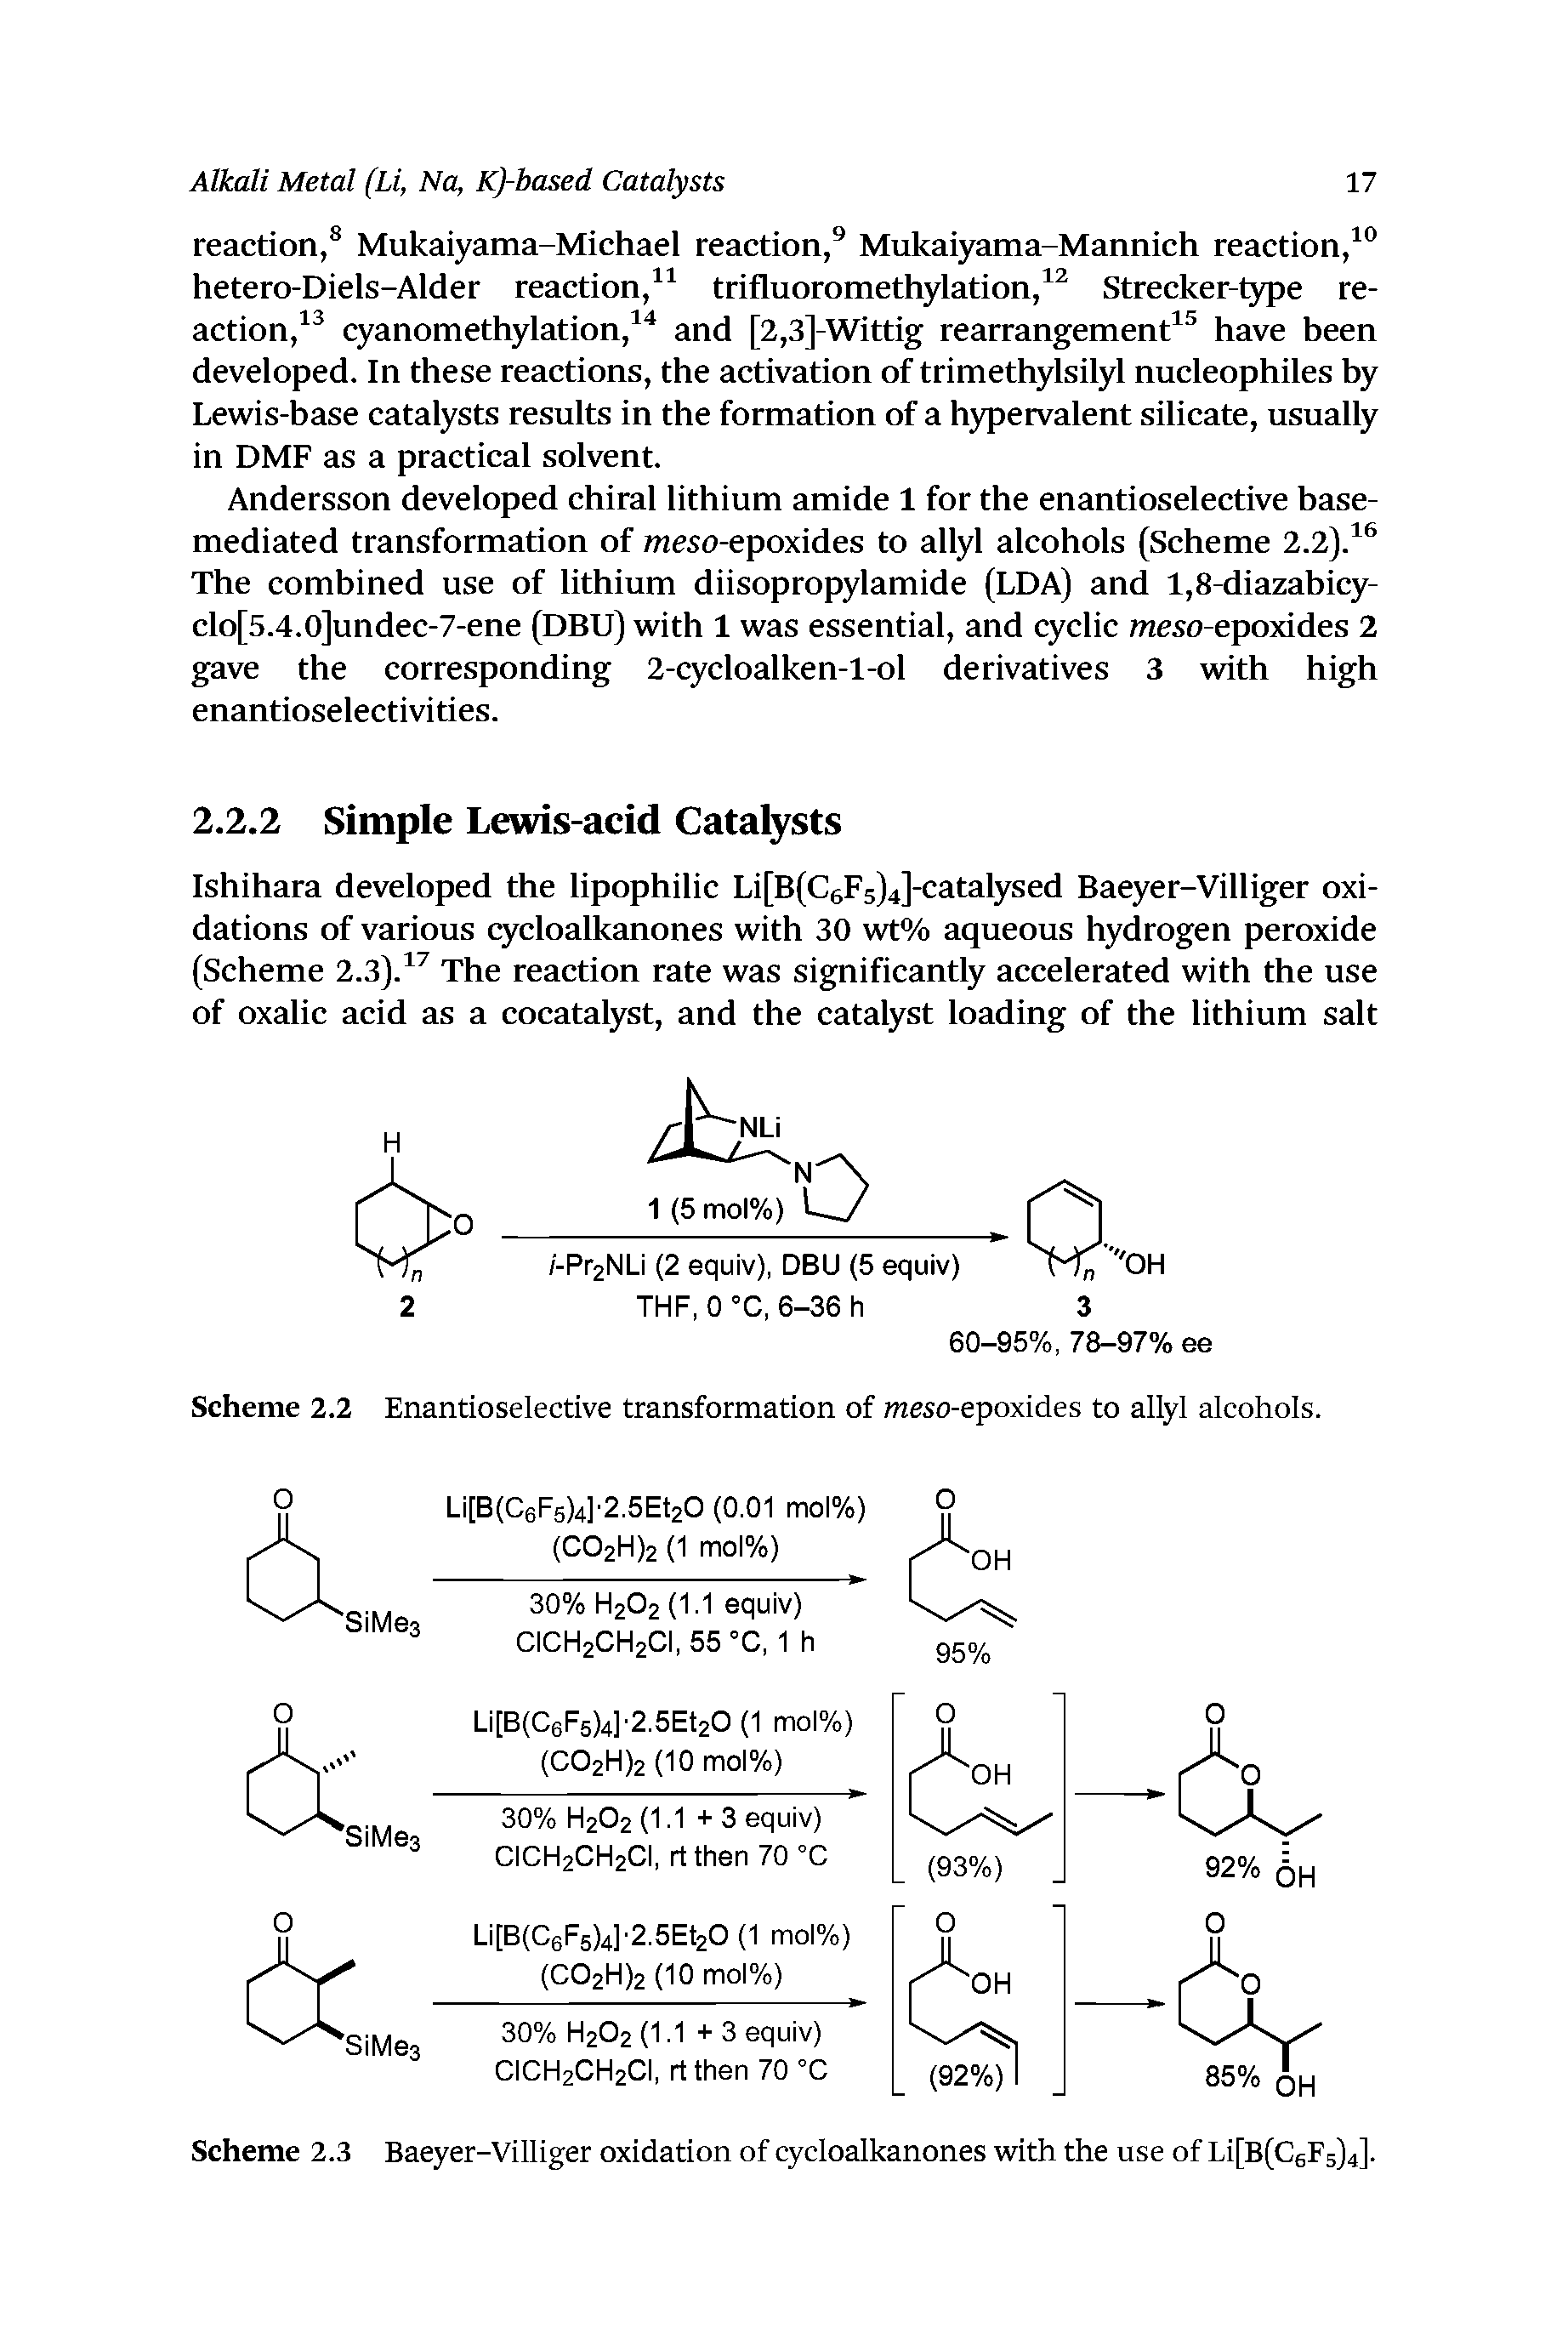 Scheme 2.3 Baeyer-Villiger oxidation of cycloalkanones with the use of Li[B(C6Fs)4].